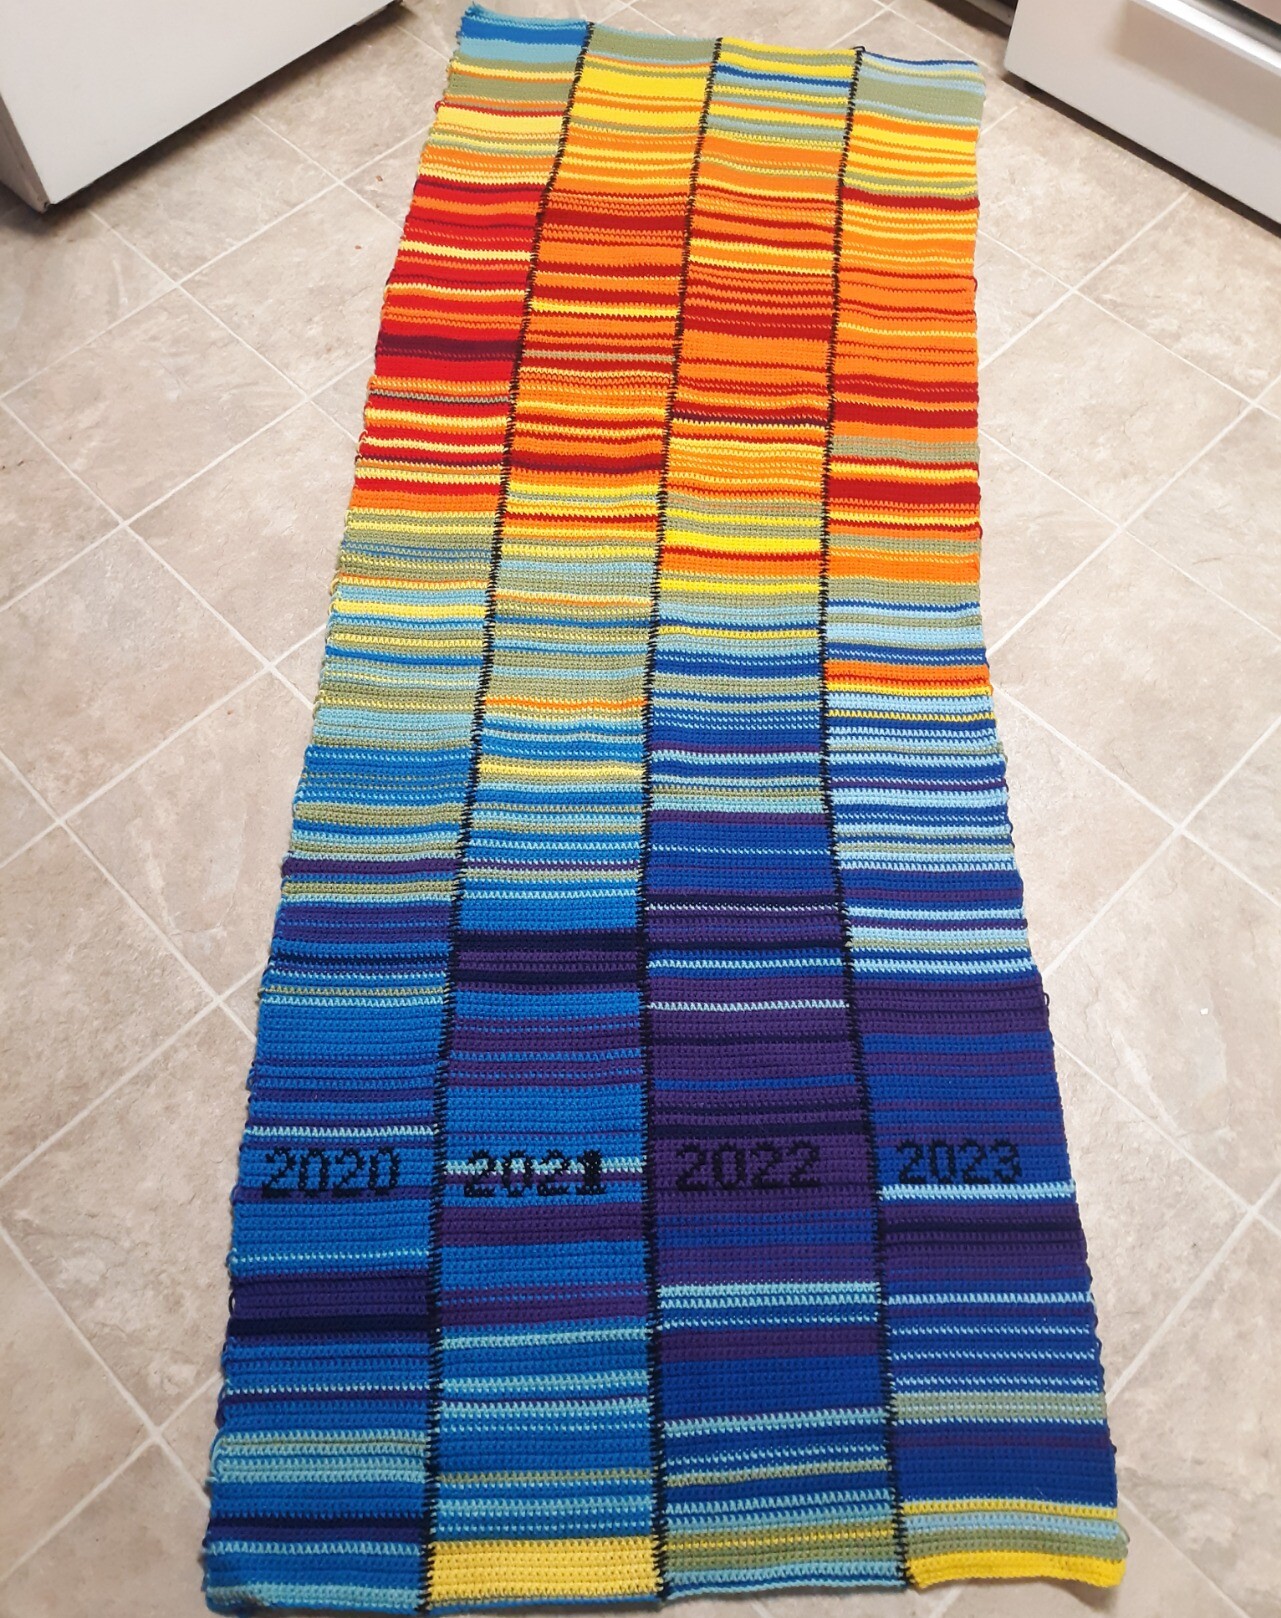 A long crochet piece made of four columns in rainbow colors. Each column is labeled with the year in black stitching. The gradient of colors moves from blues in the winter and oranges and yellows for the summer. Noticeable sections are the very hot summer __of 2020 in magenta, and the colder than average winter of 2022 in purple.